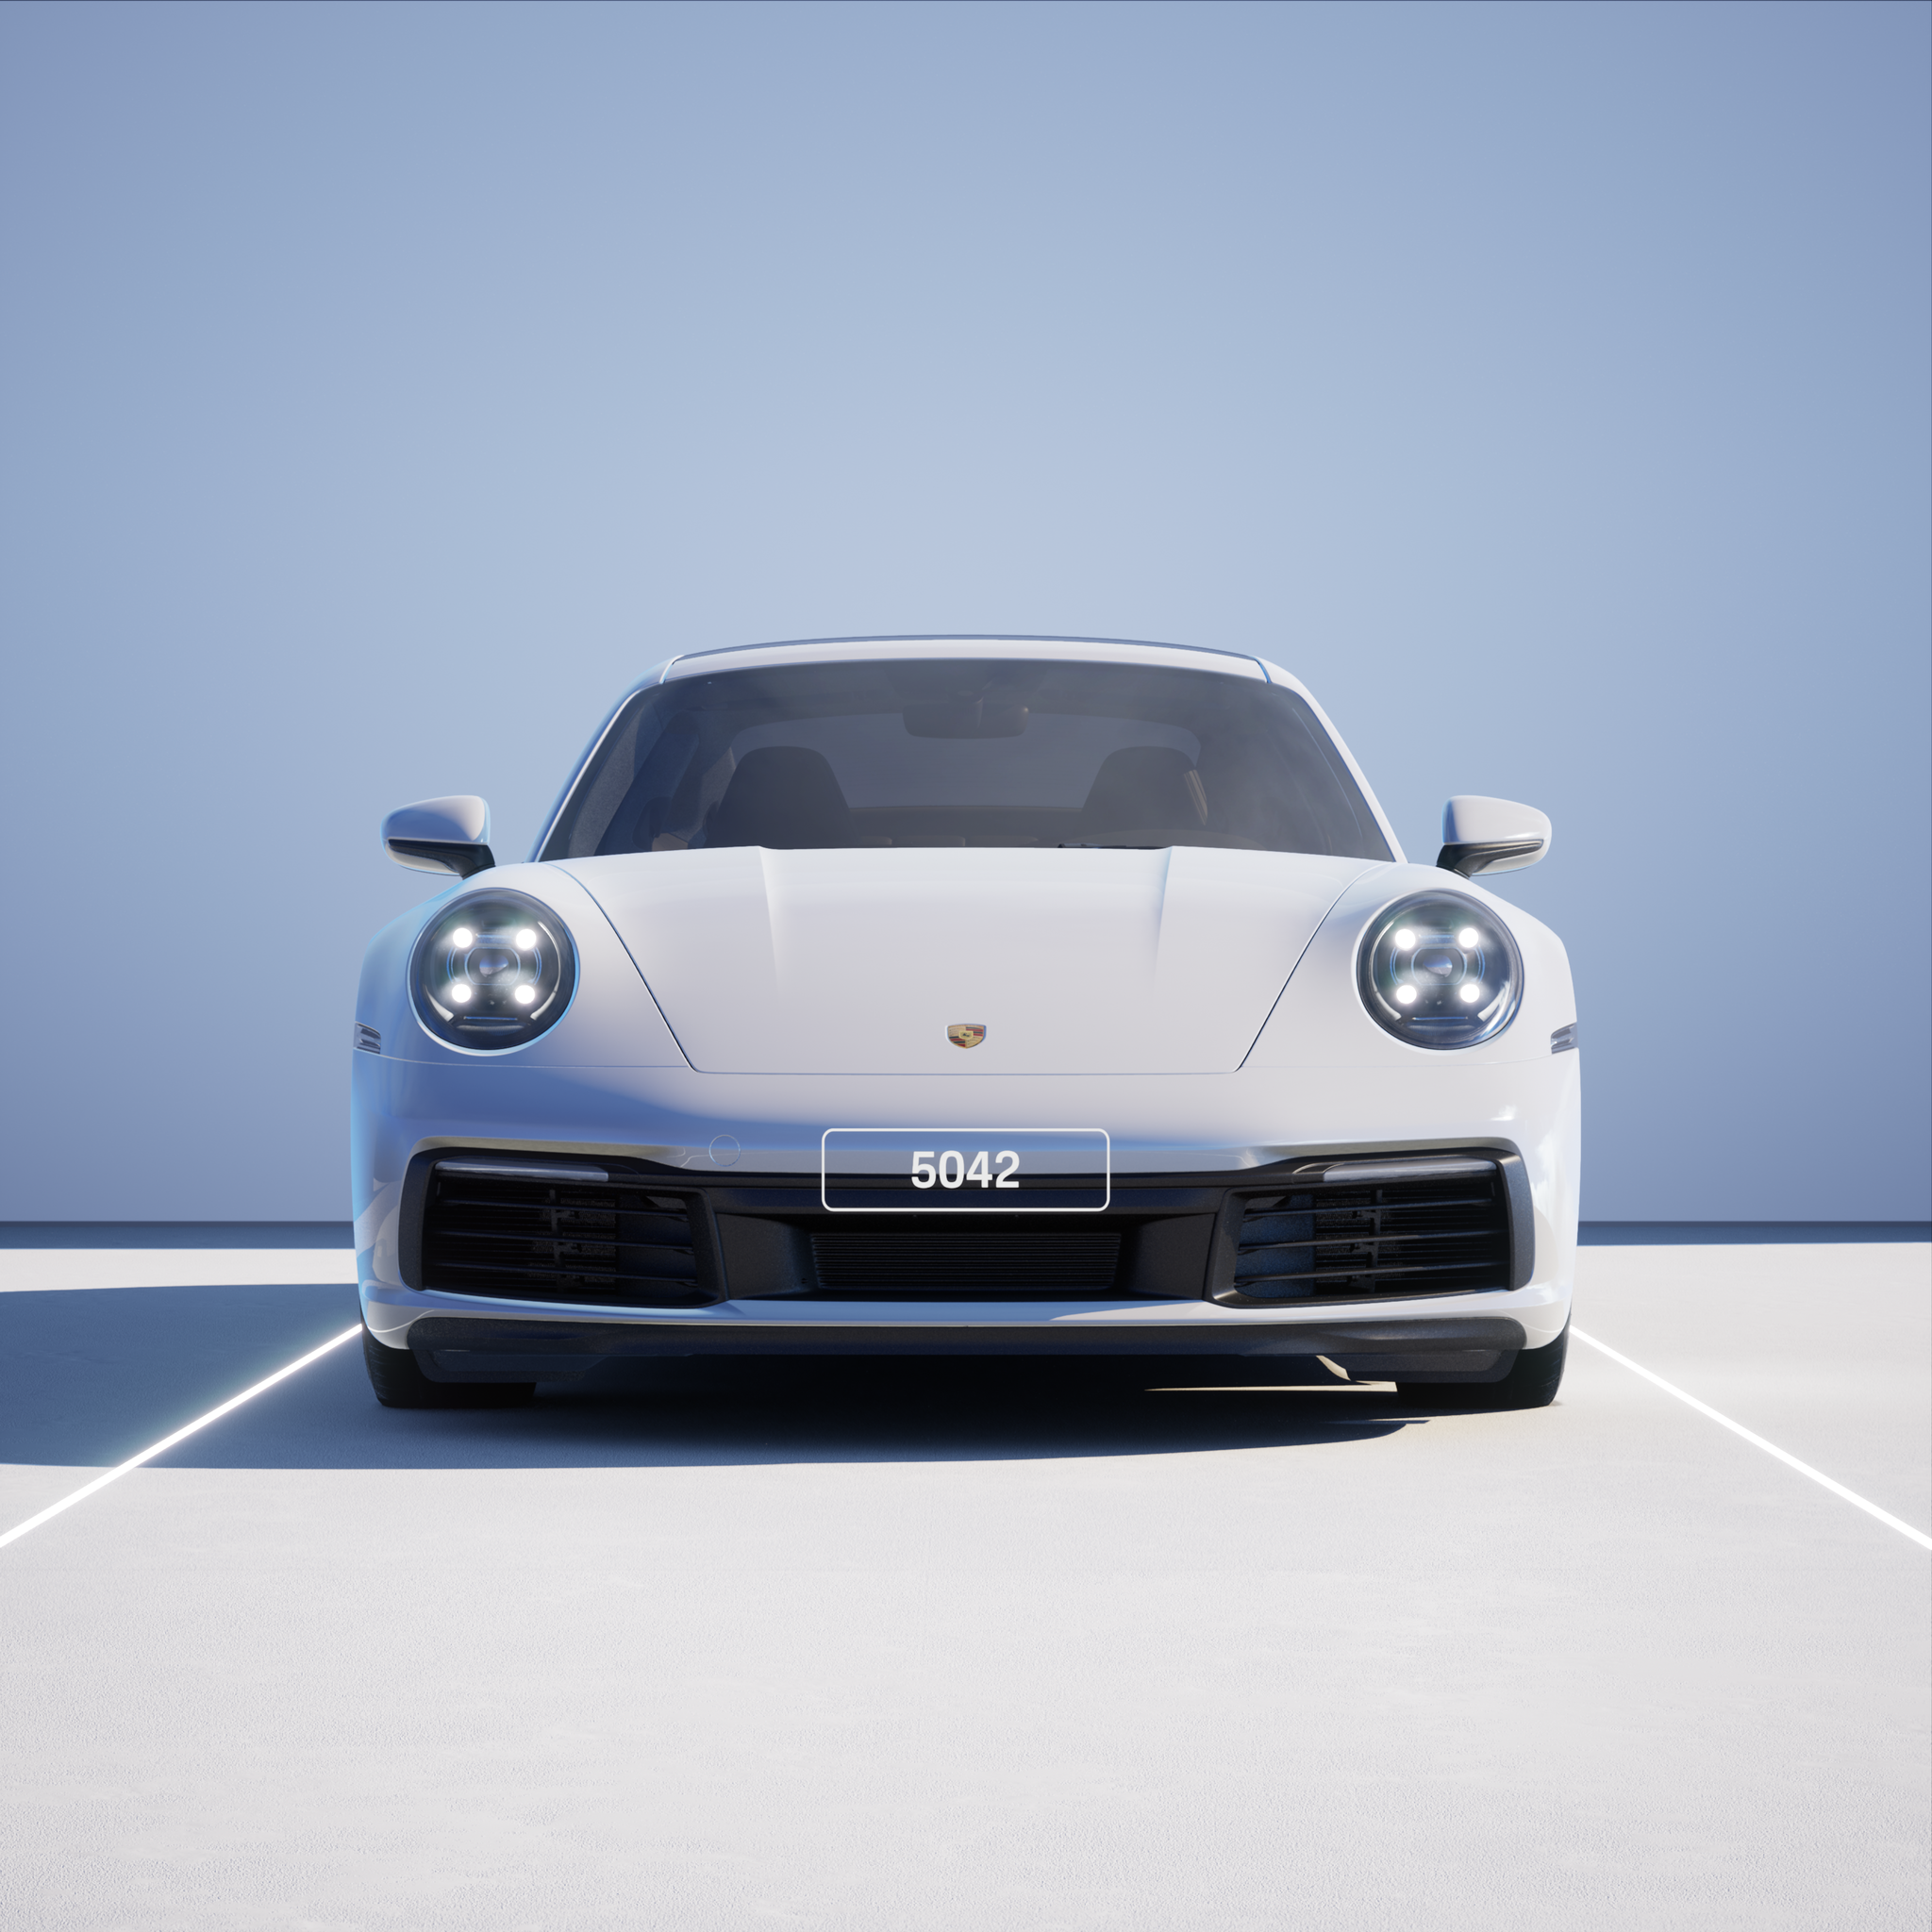 The PORSCHΞ 911 5042 image in phase